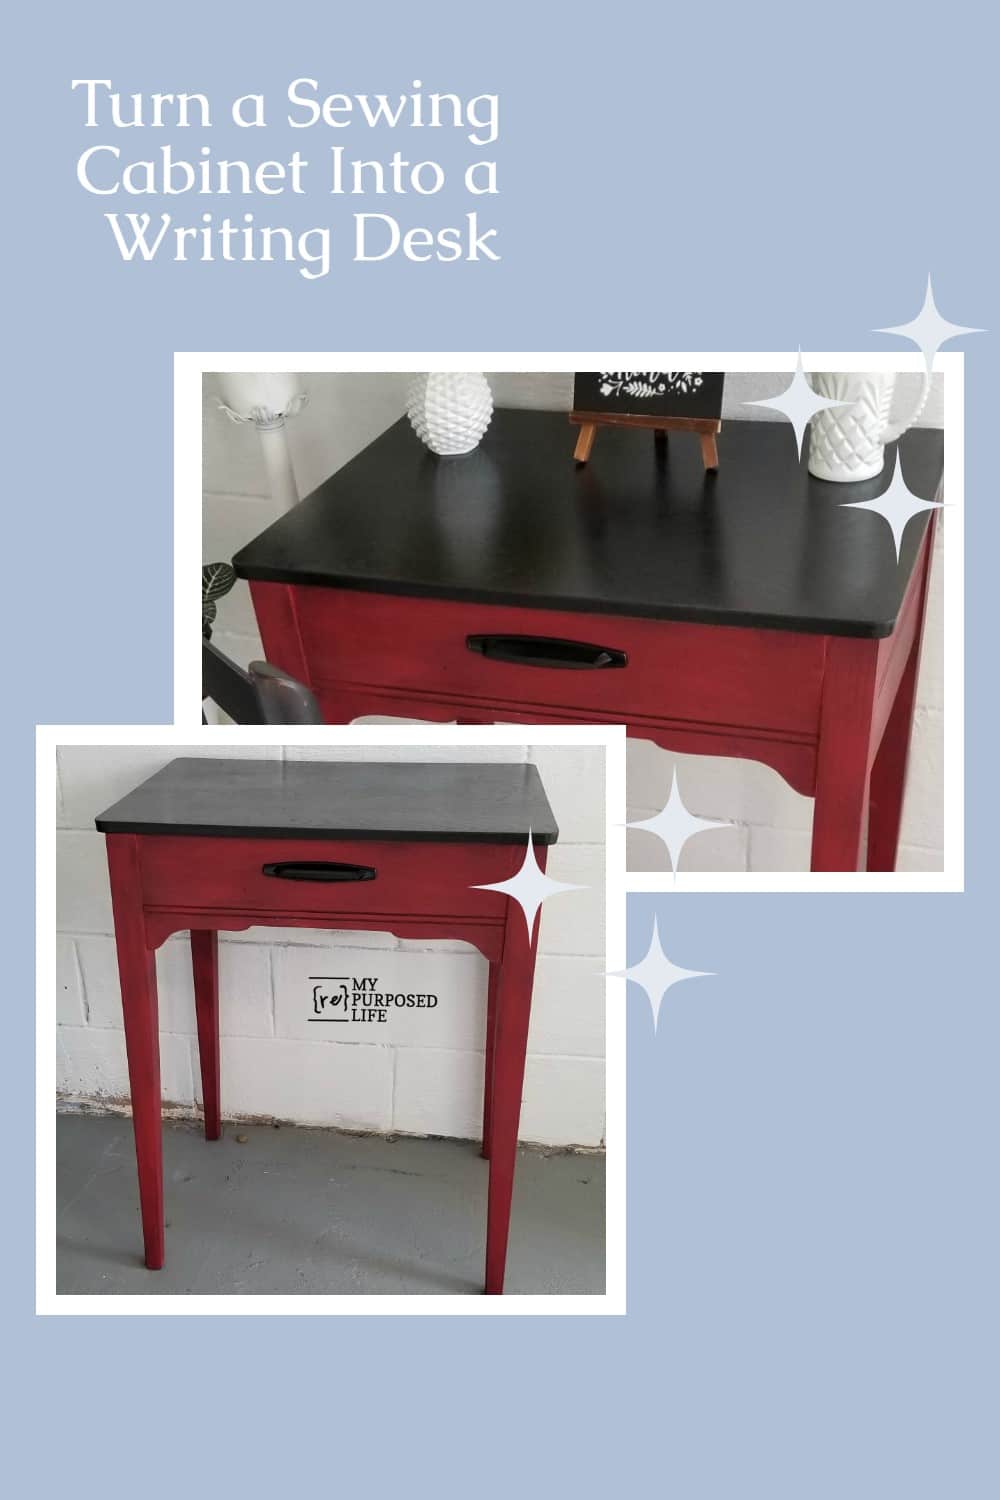 How to turn a sewing cabinet into a side table that could also be used as a writing desk when paired with a chair. Easy tutorial with minimal tools involved. #MyRepurposedLife #sewingcabinet #sidetable #table #repurposed #furniture #writingdesk #easy #project via @repurposedlife